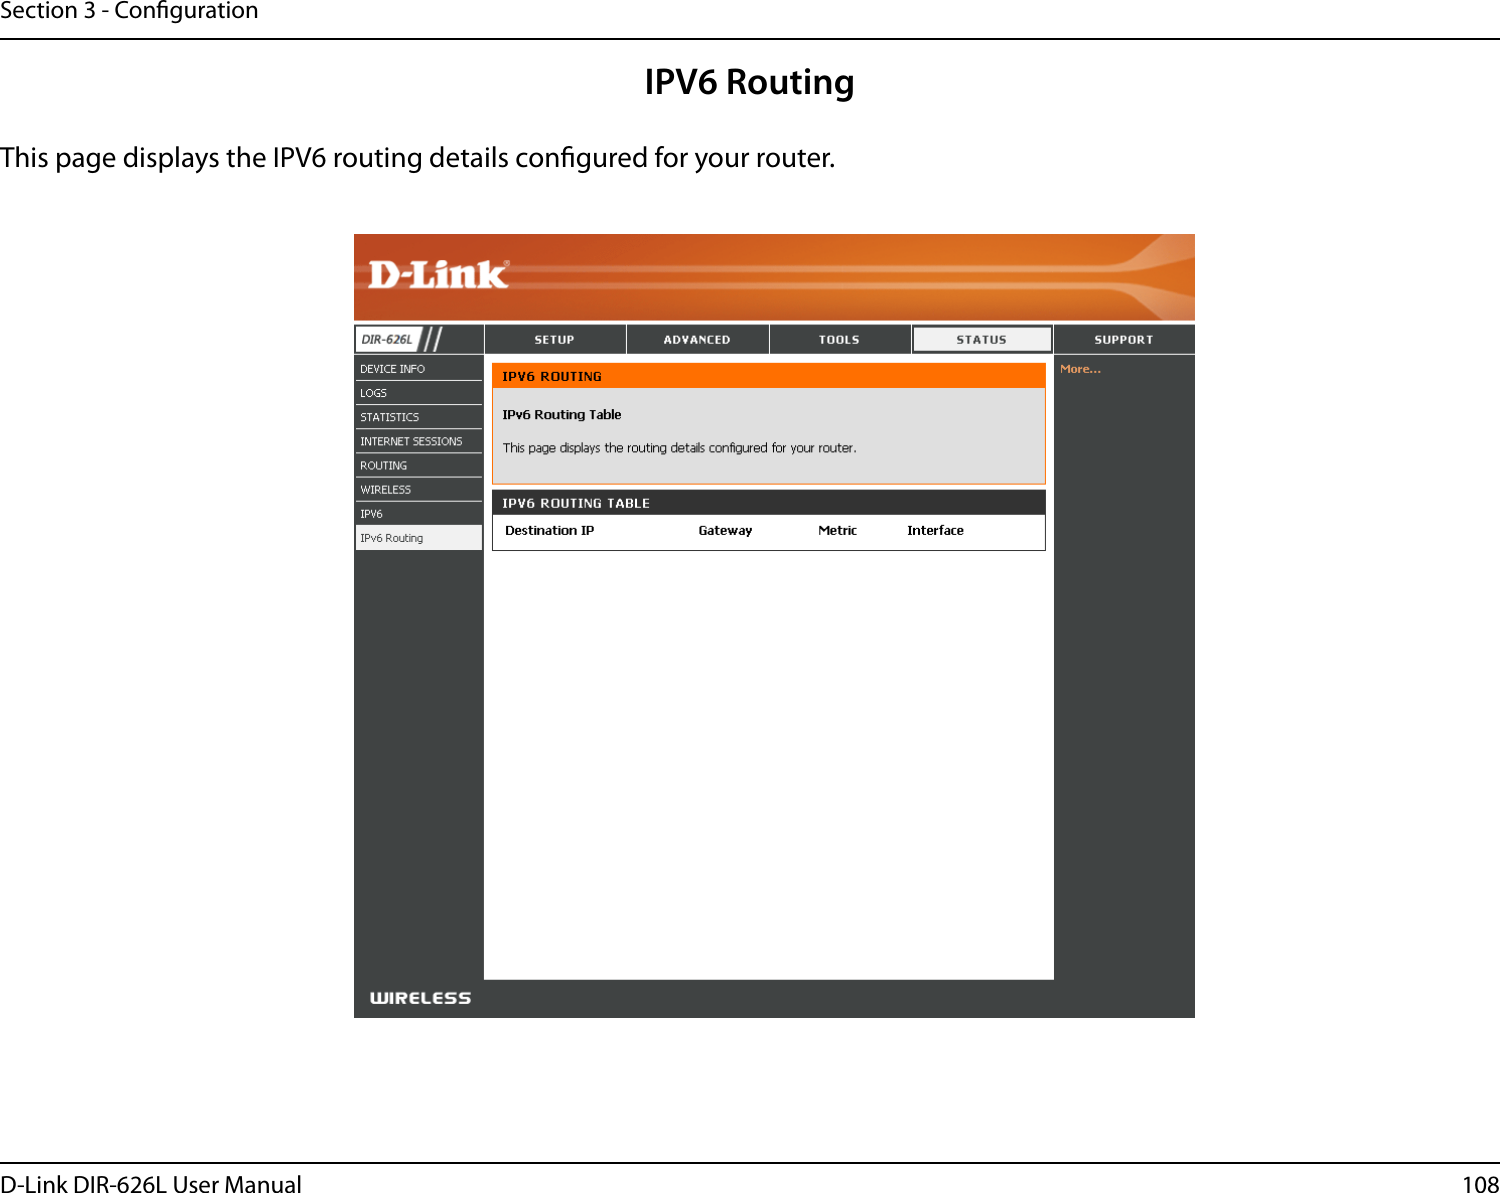 108D-Link DIR-626L User ManualSection 3 - CongurationIPV6 RoutingThis page displays the IPV6 routing details congured for your router. 